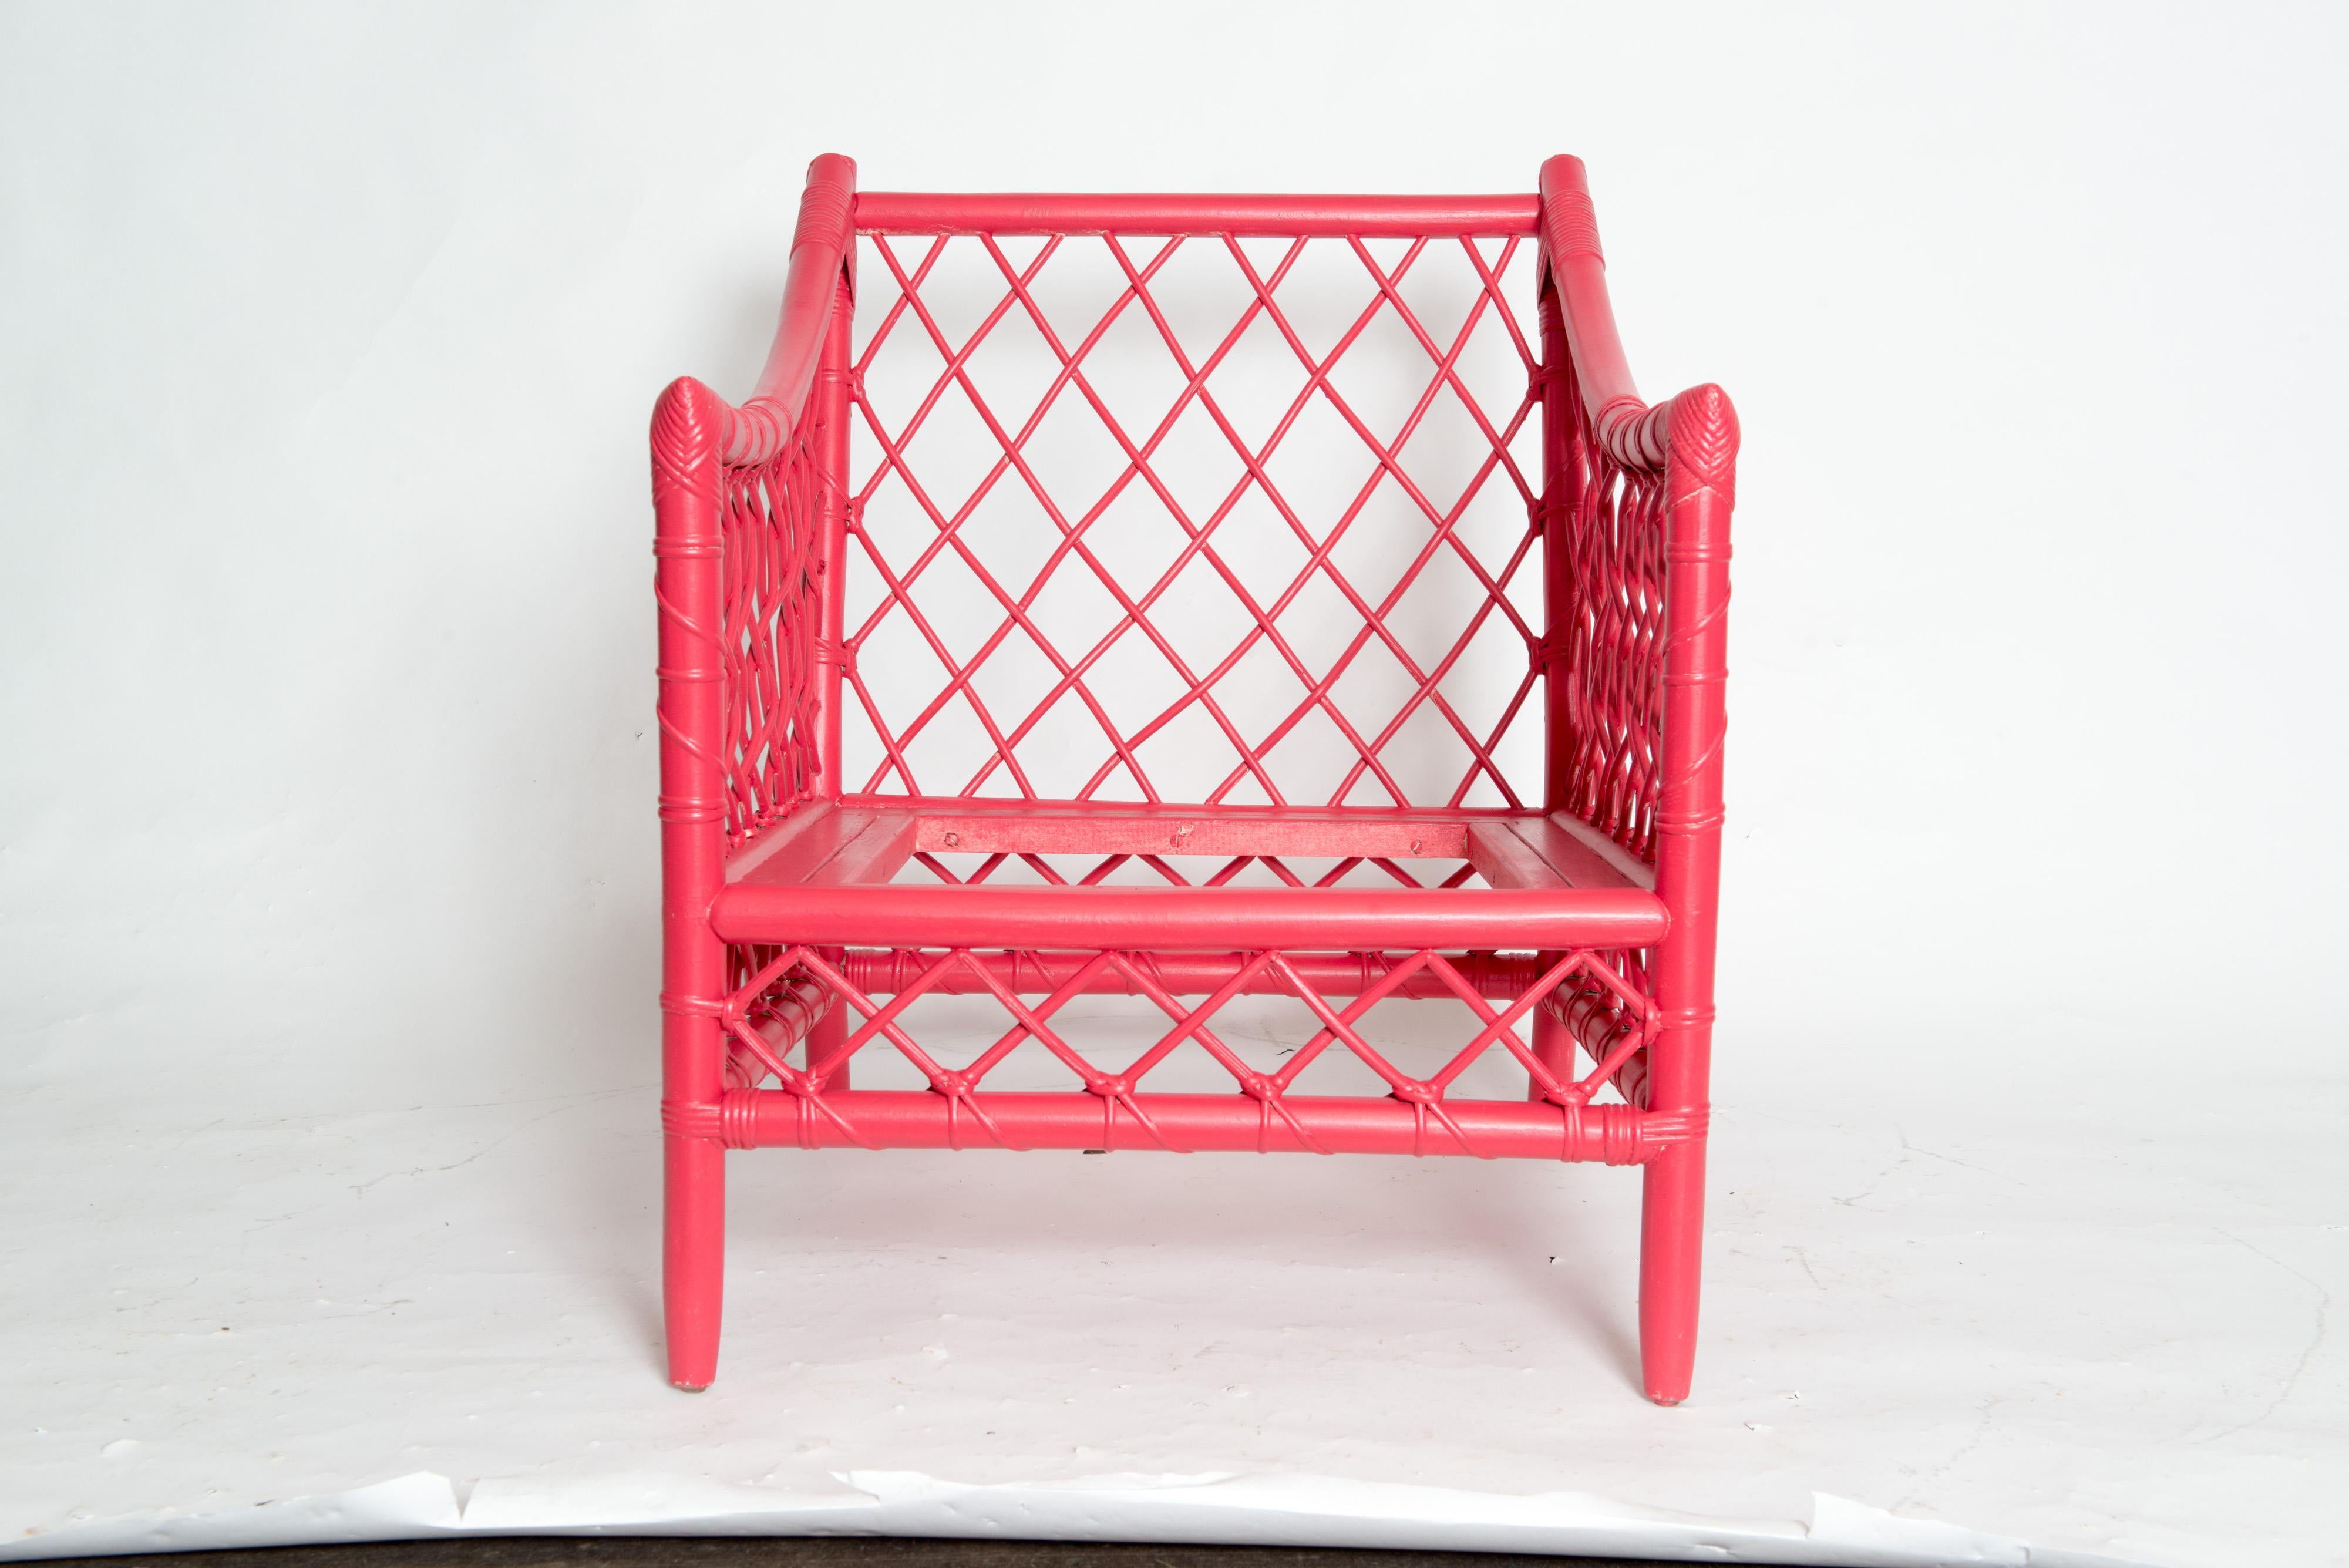 Chinese red woven rattan arm chair from Miami based Empire Rattan Company. The chair's rattan is woven in a large diamond pattern creating a striking appearance. Ready for your upholstered seat.